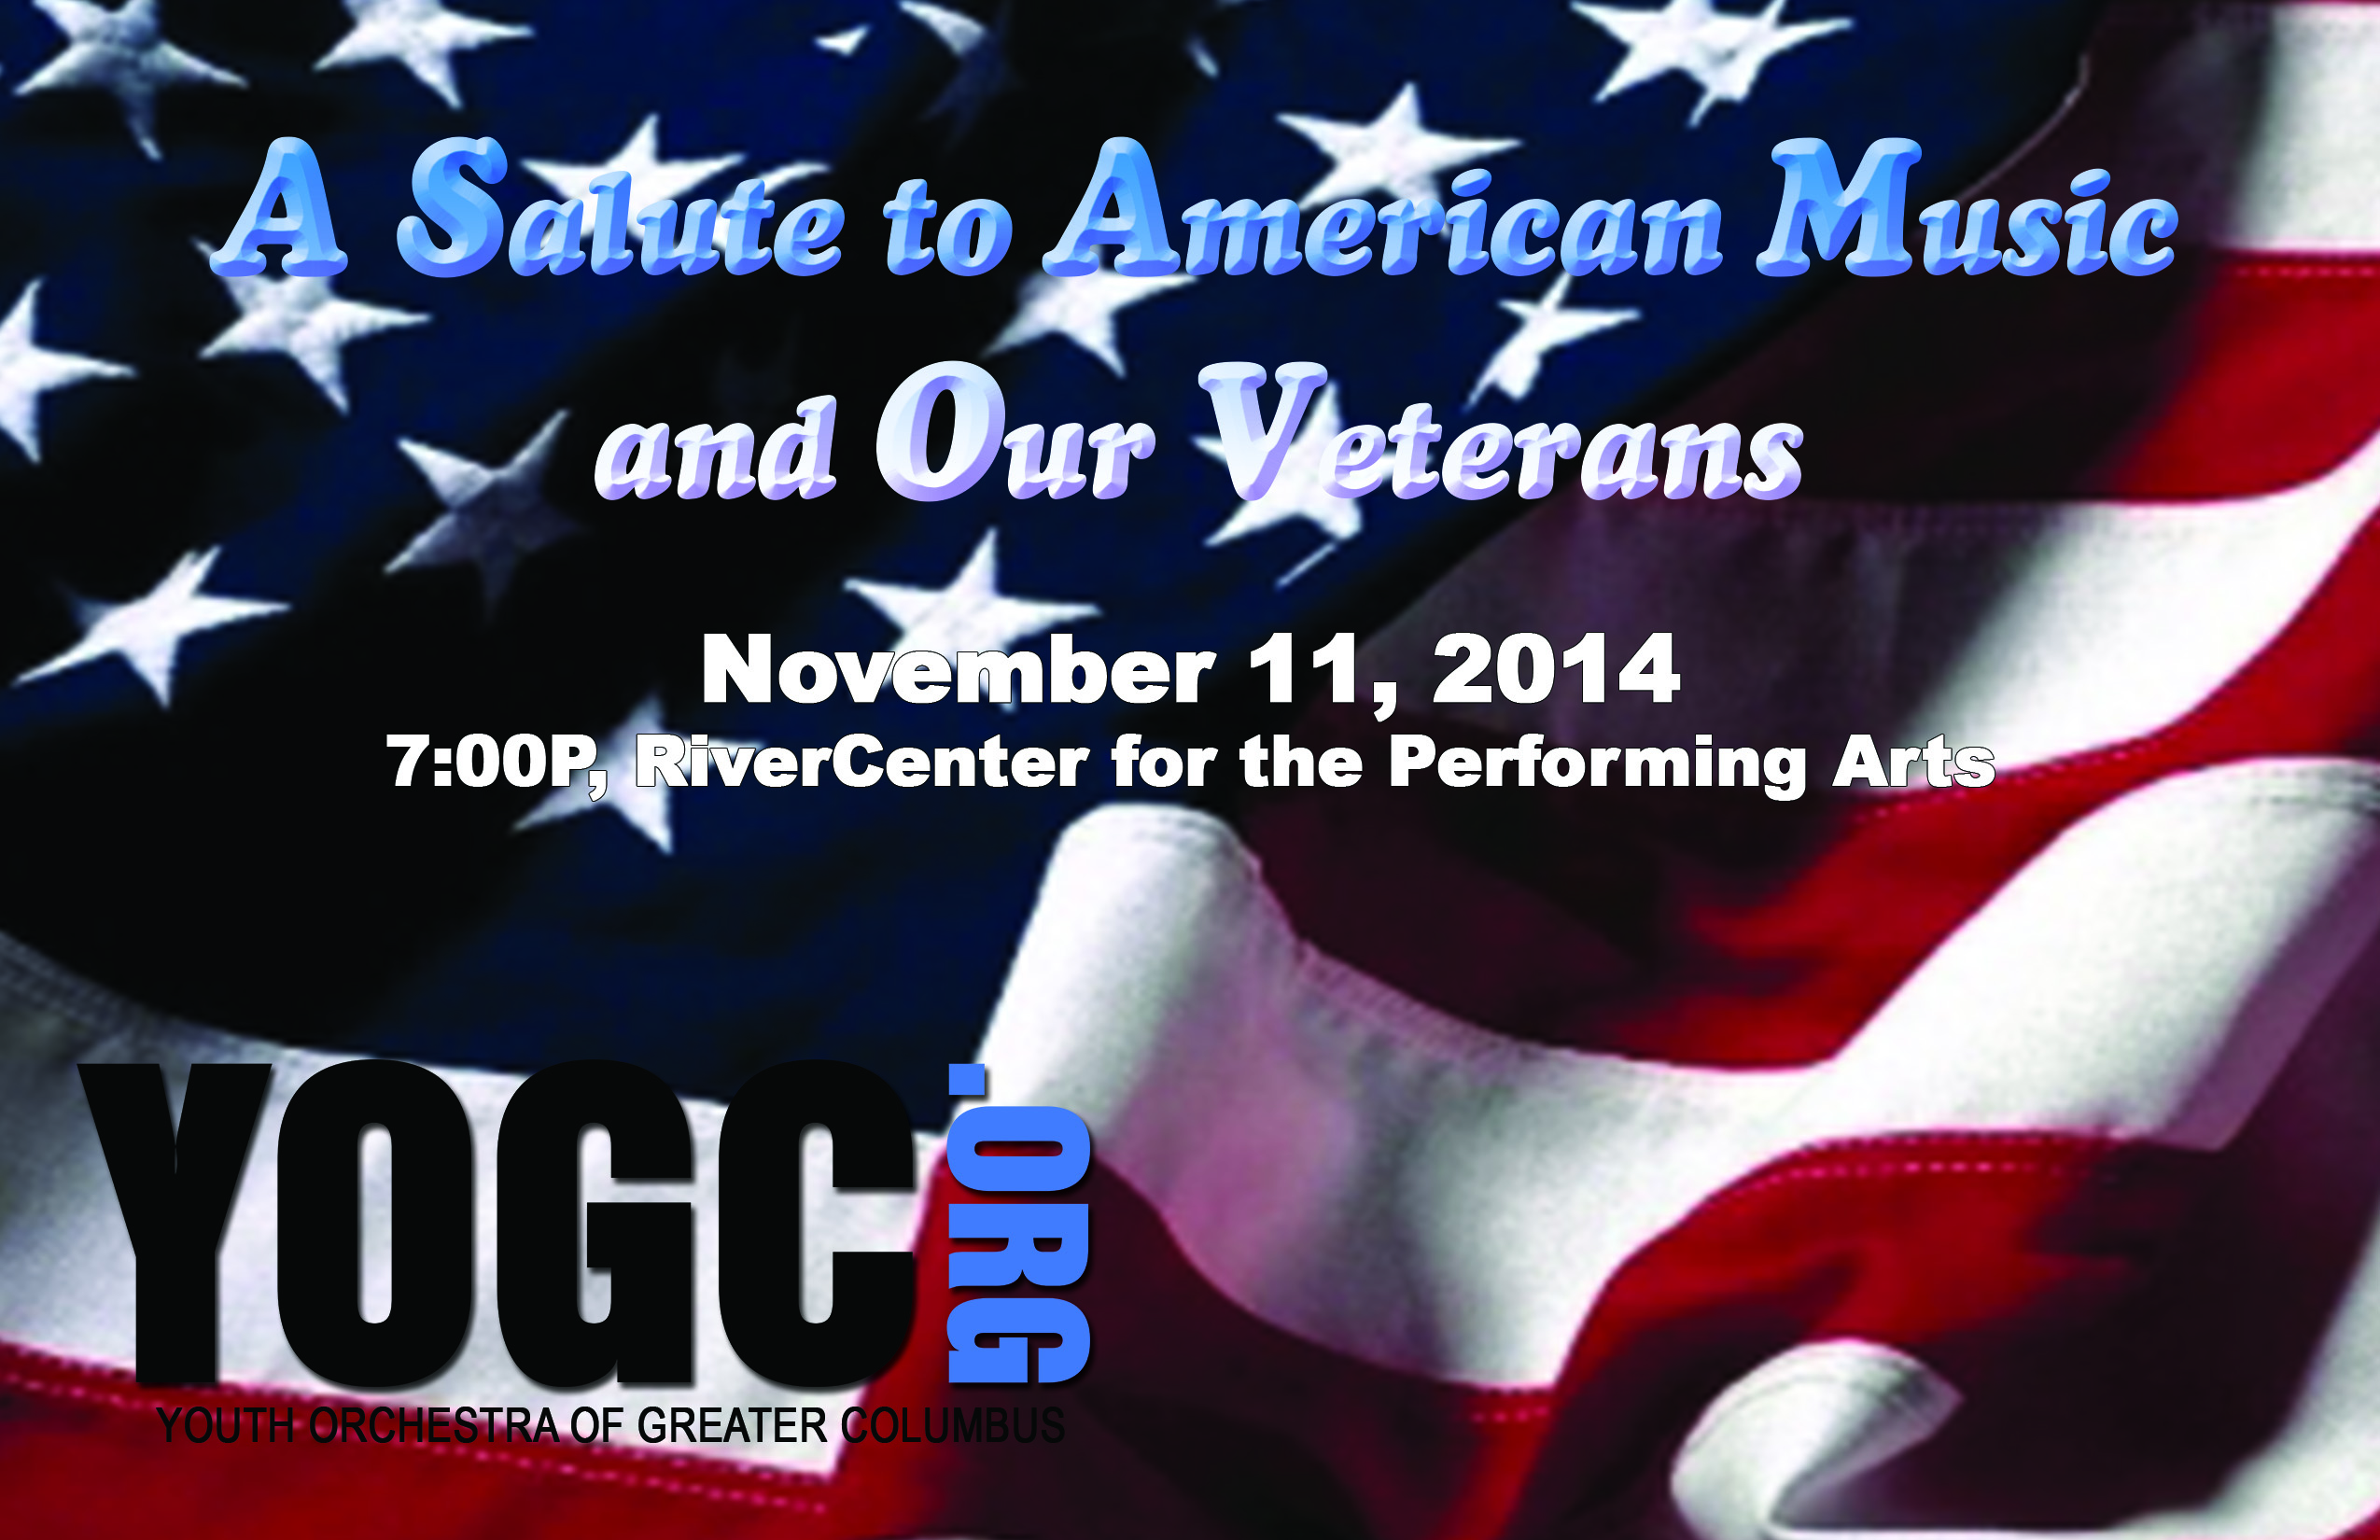 Youth Orchestra of Greater Columbus presents A Salute to American Music and Our Veterans